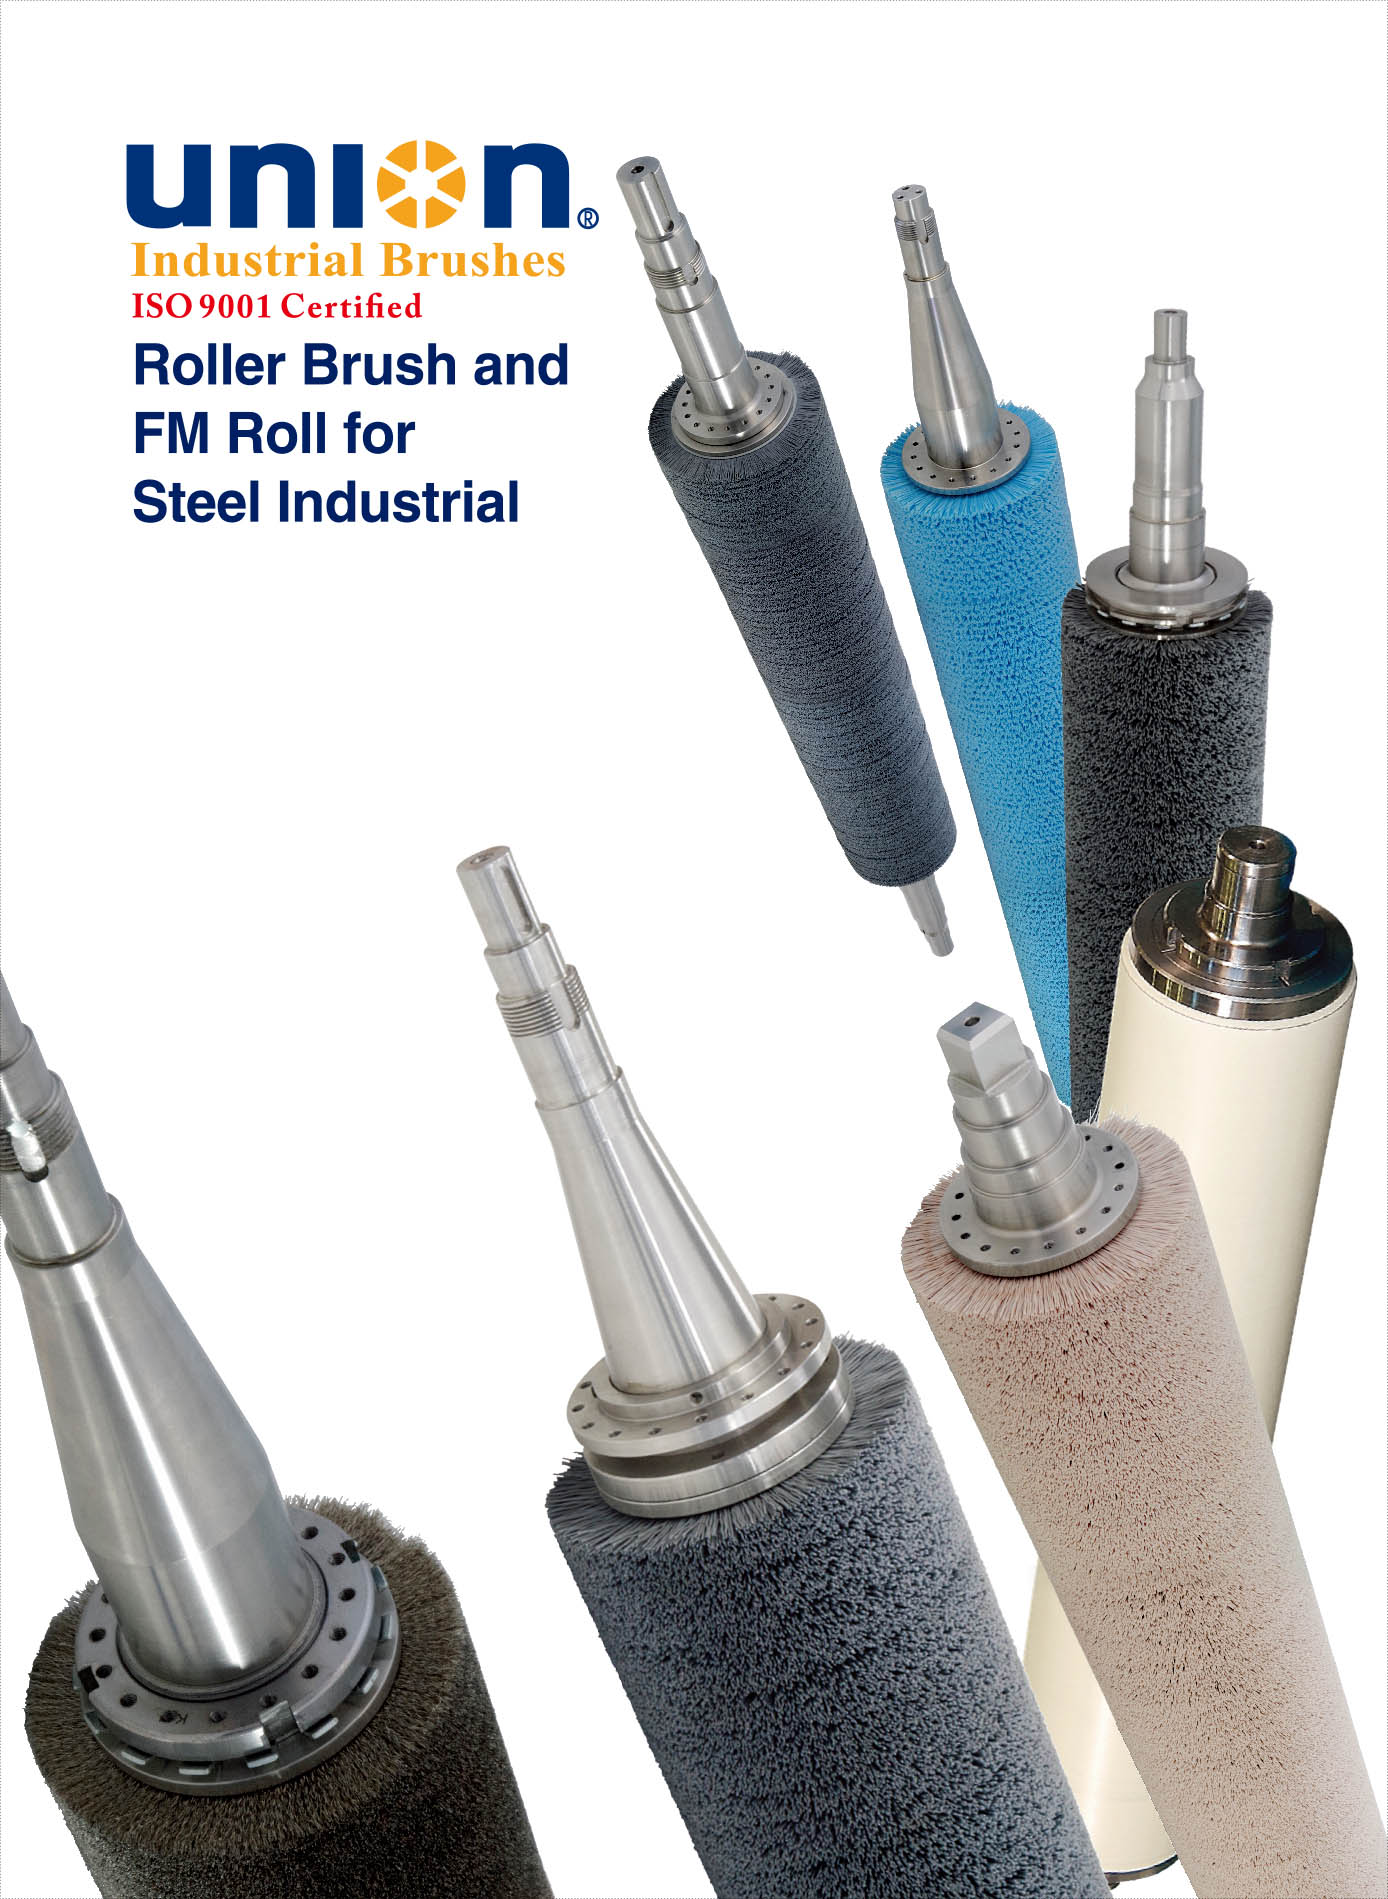 UNION Roller Brush and High Tech FM Roll for Steel Industrial